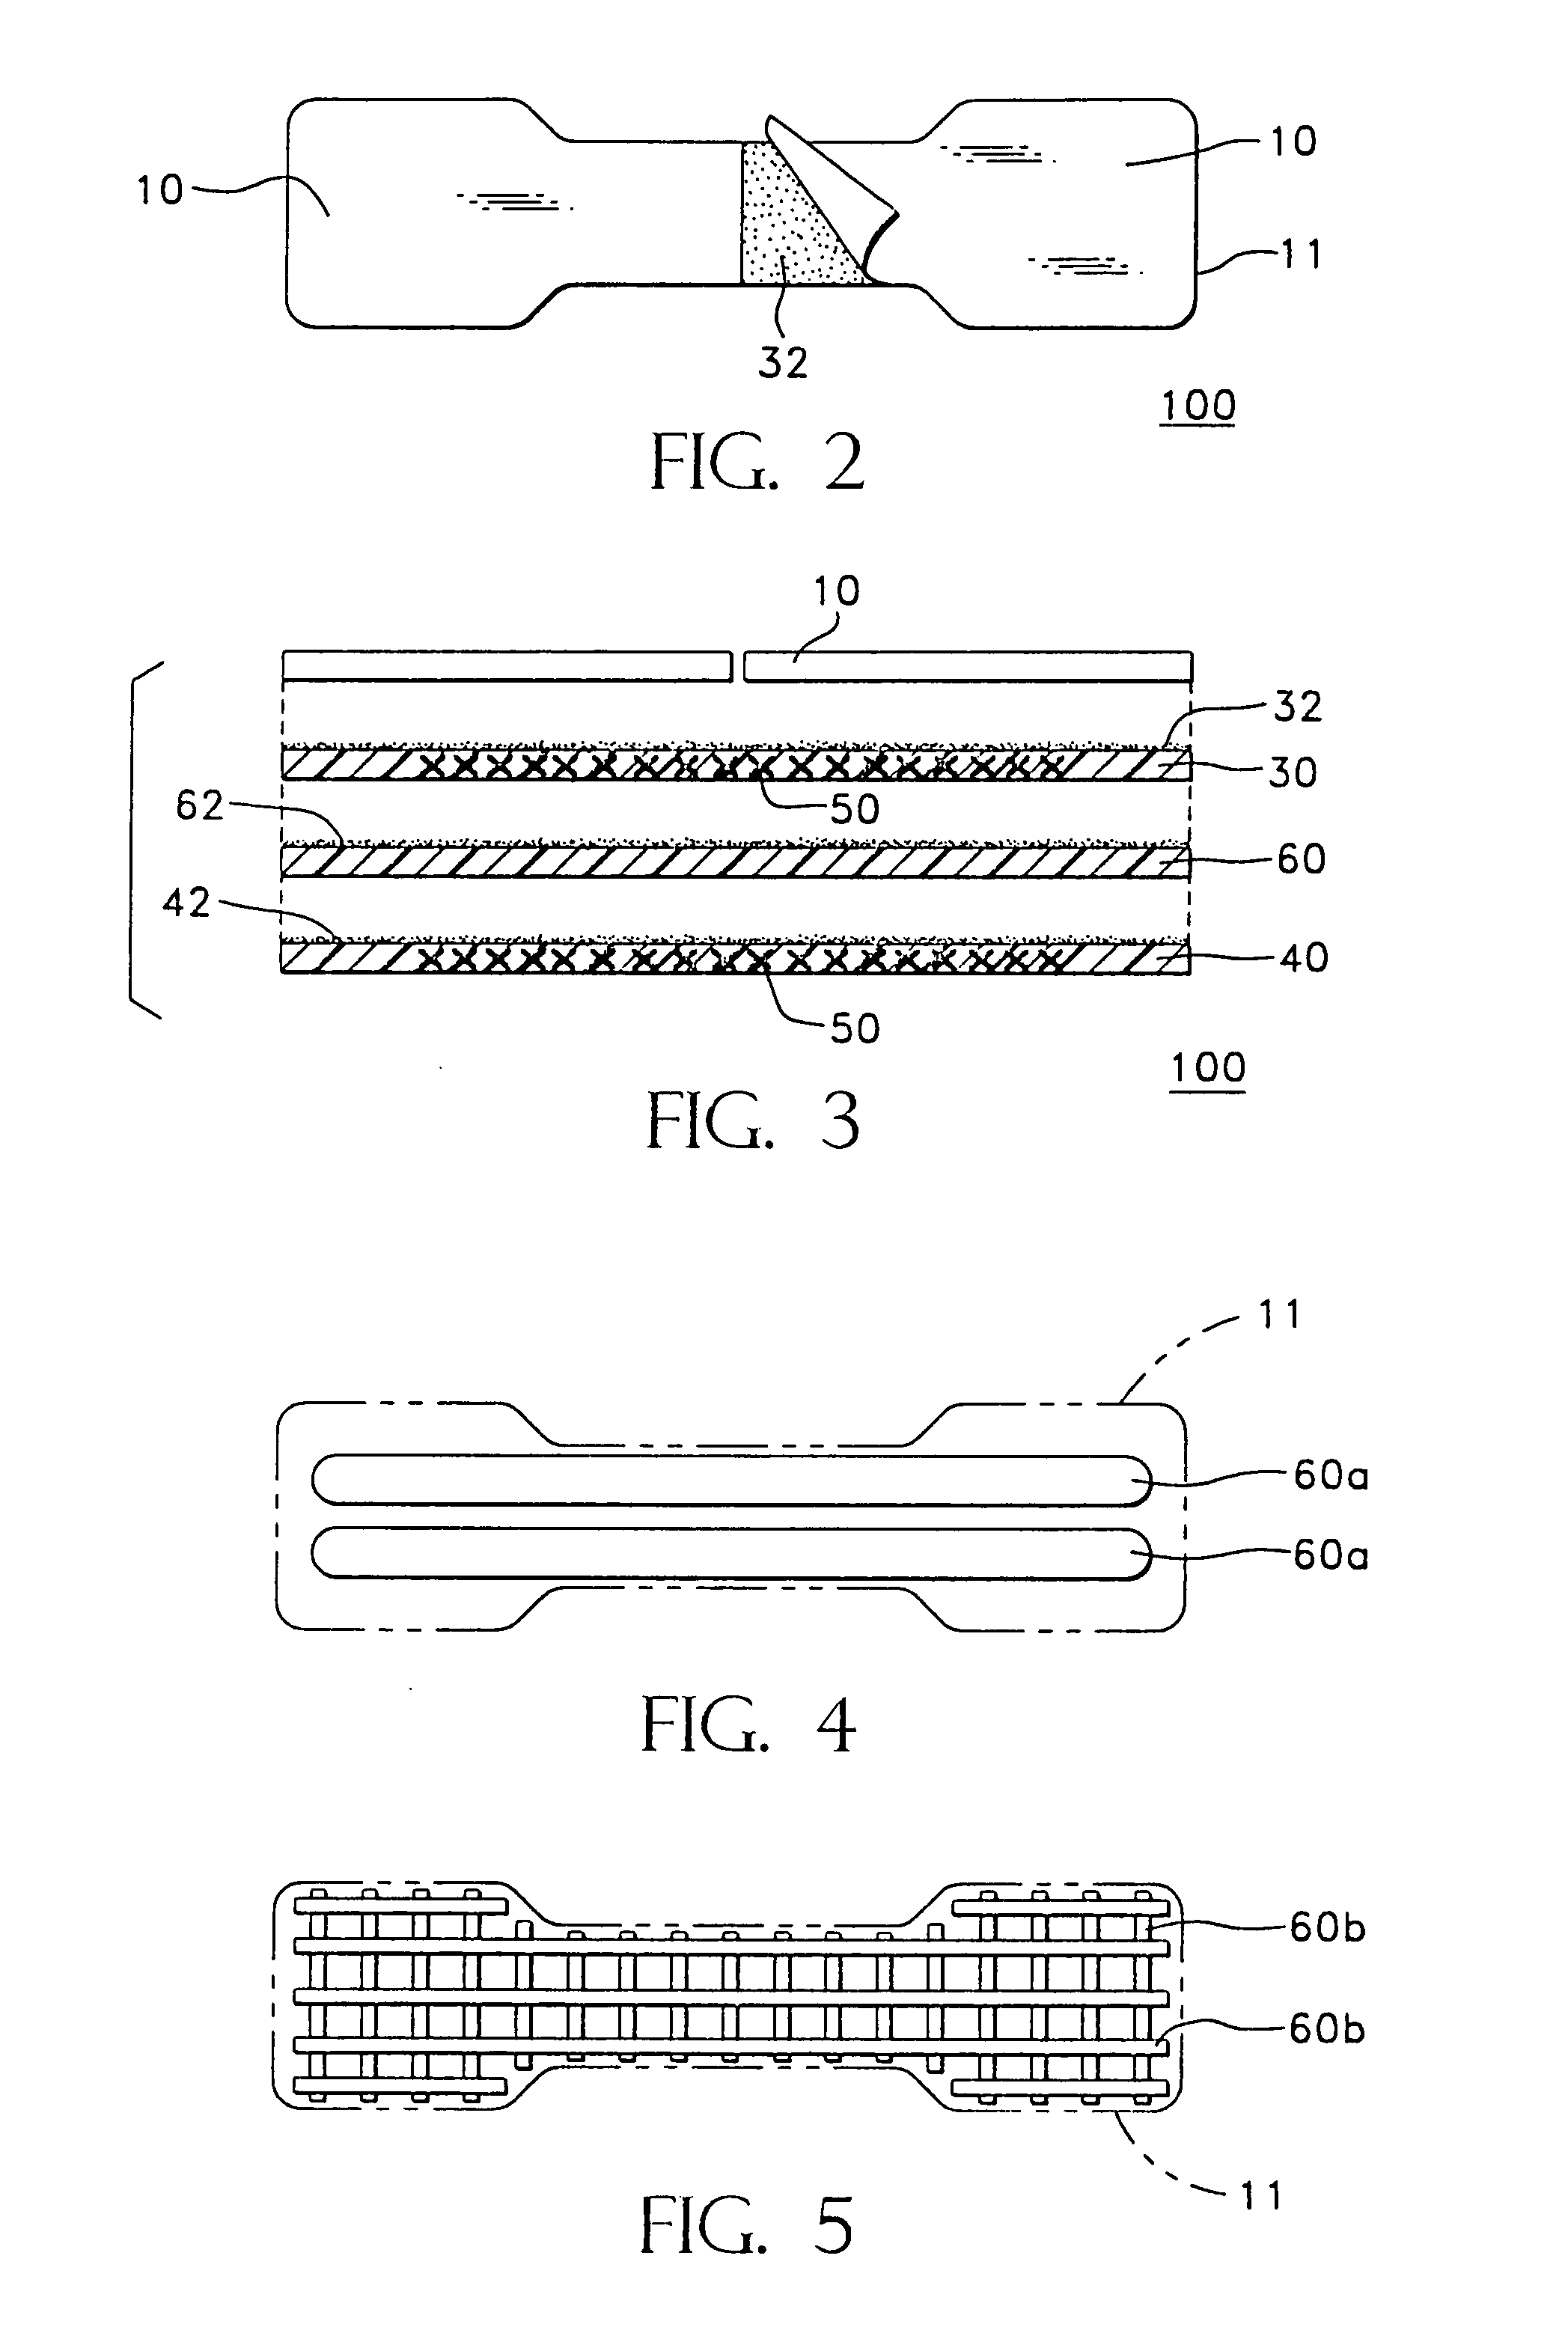 Adhesively applied external nasal strips and dilators containing medications and fragrances